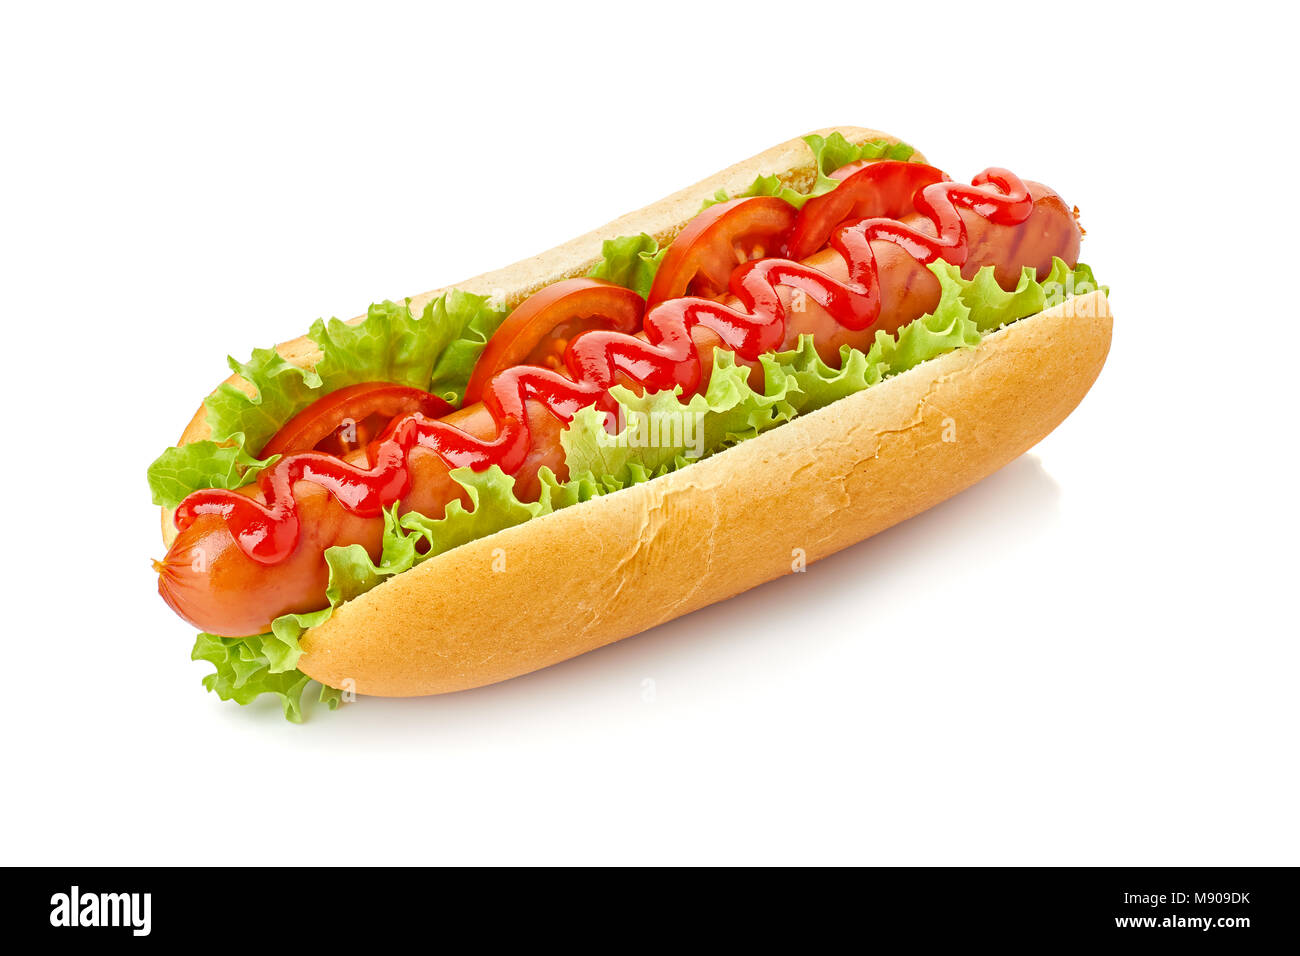 Hot dog with lettuce and tomato on white Stock Photo